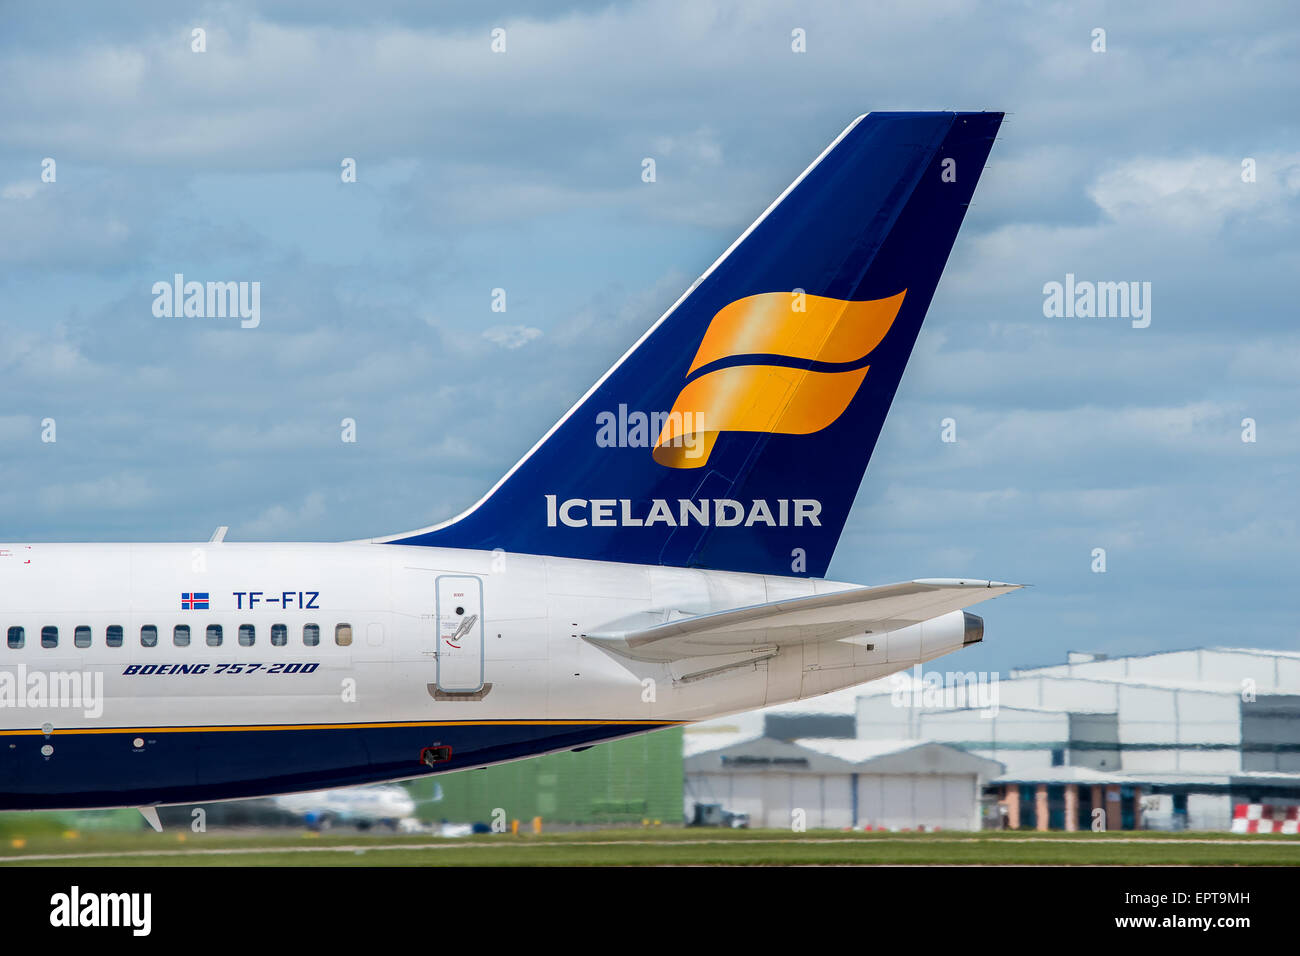 Icelandair Airlines Boeing 757 tail livery at Manchester Airport Stock Photo